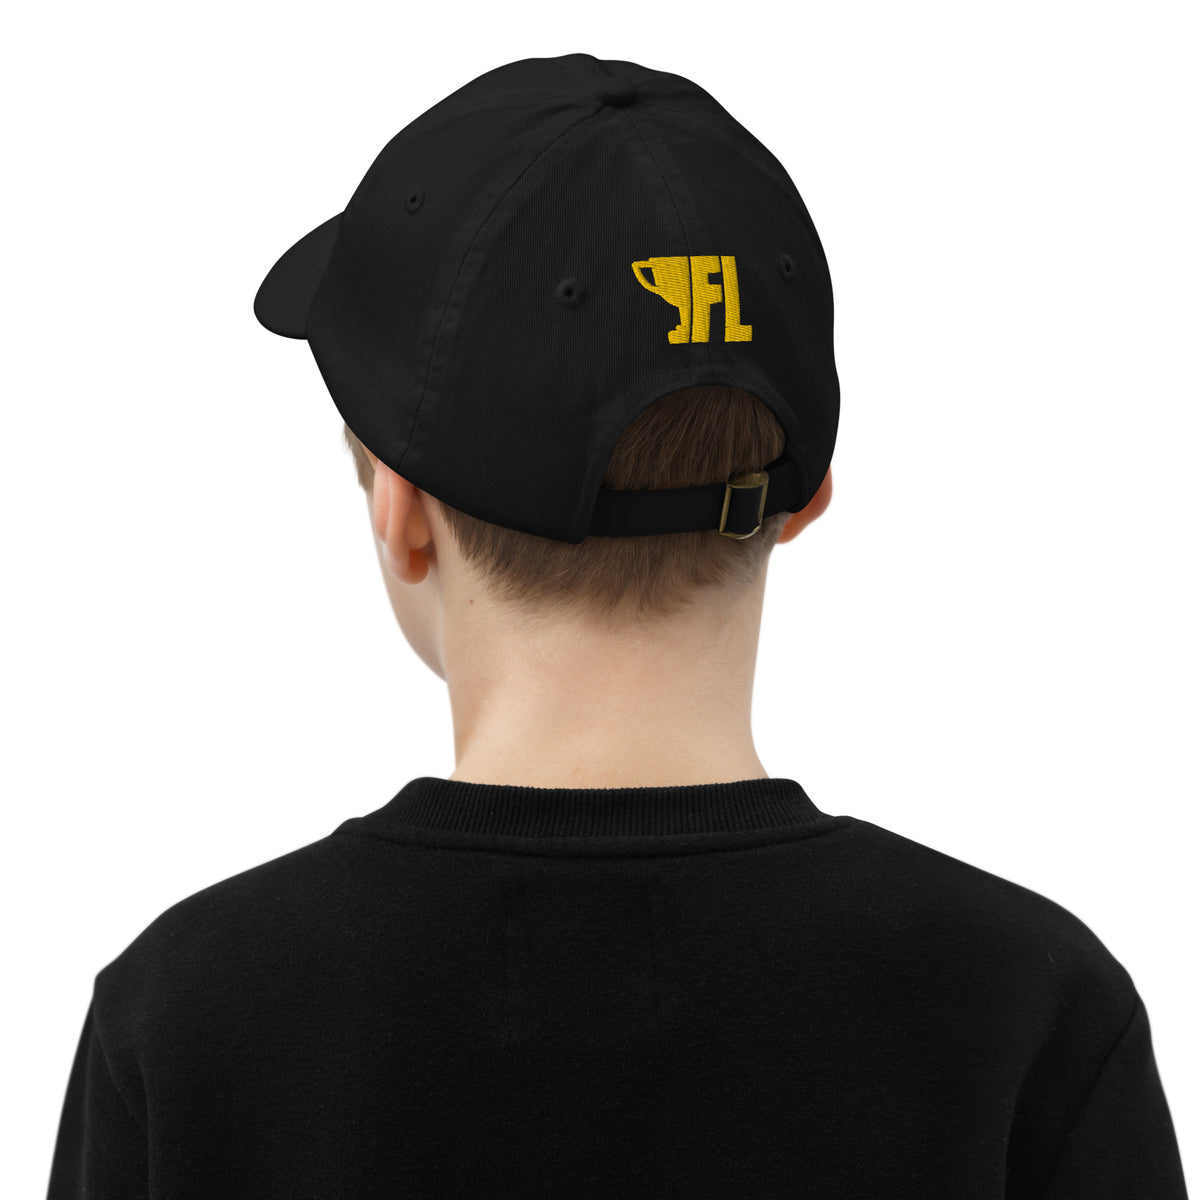 FL2024 "It's A Great Day To Be Great" Embroidered Youth Hat